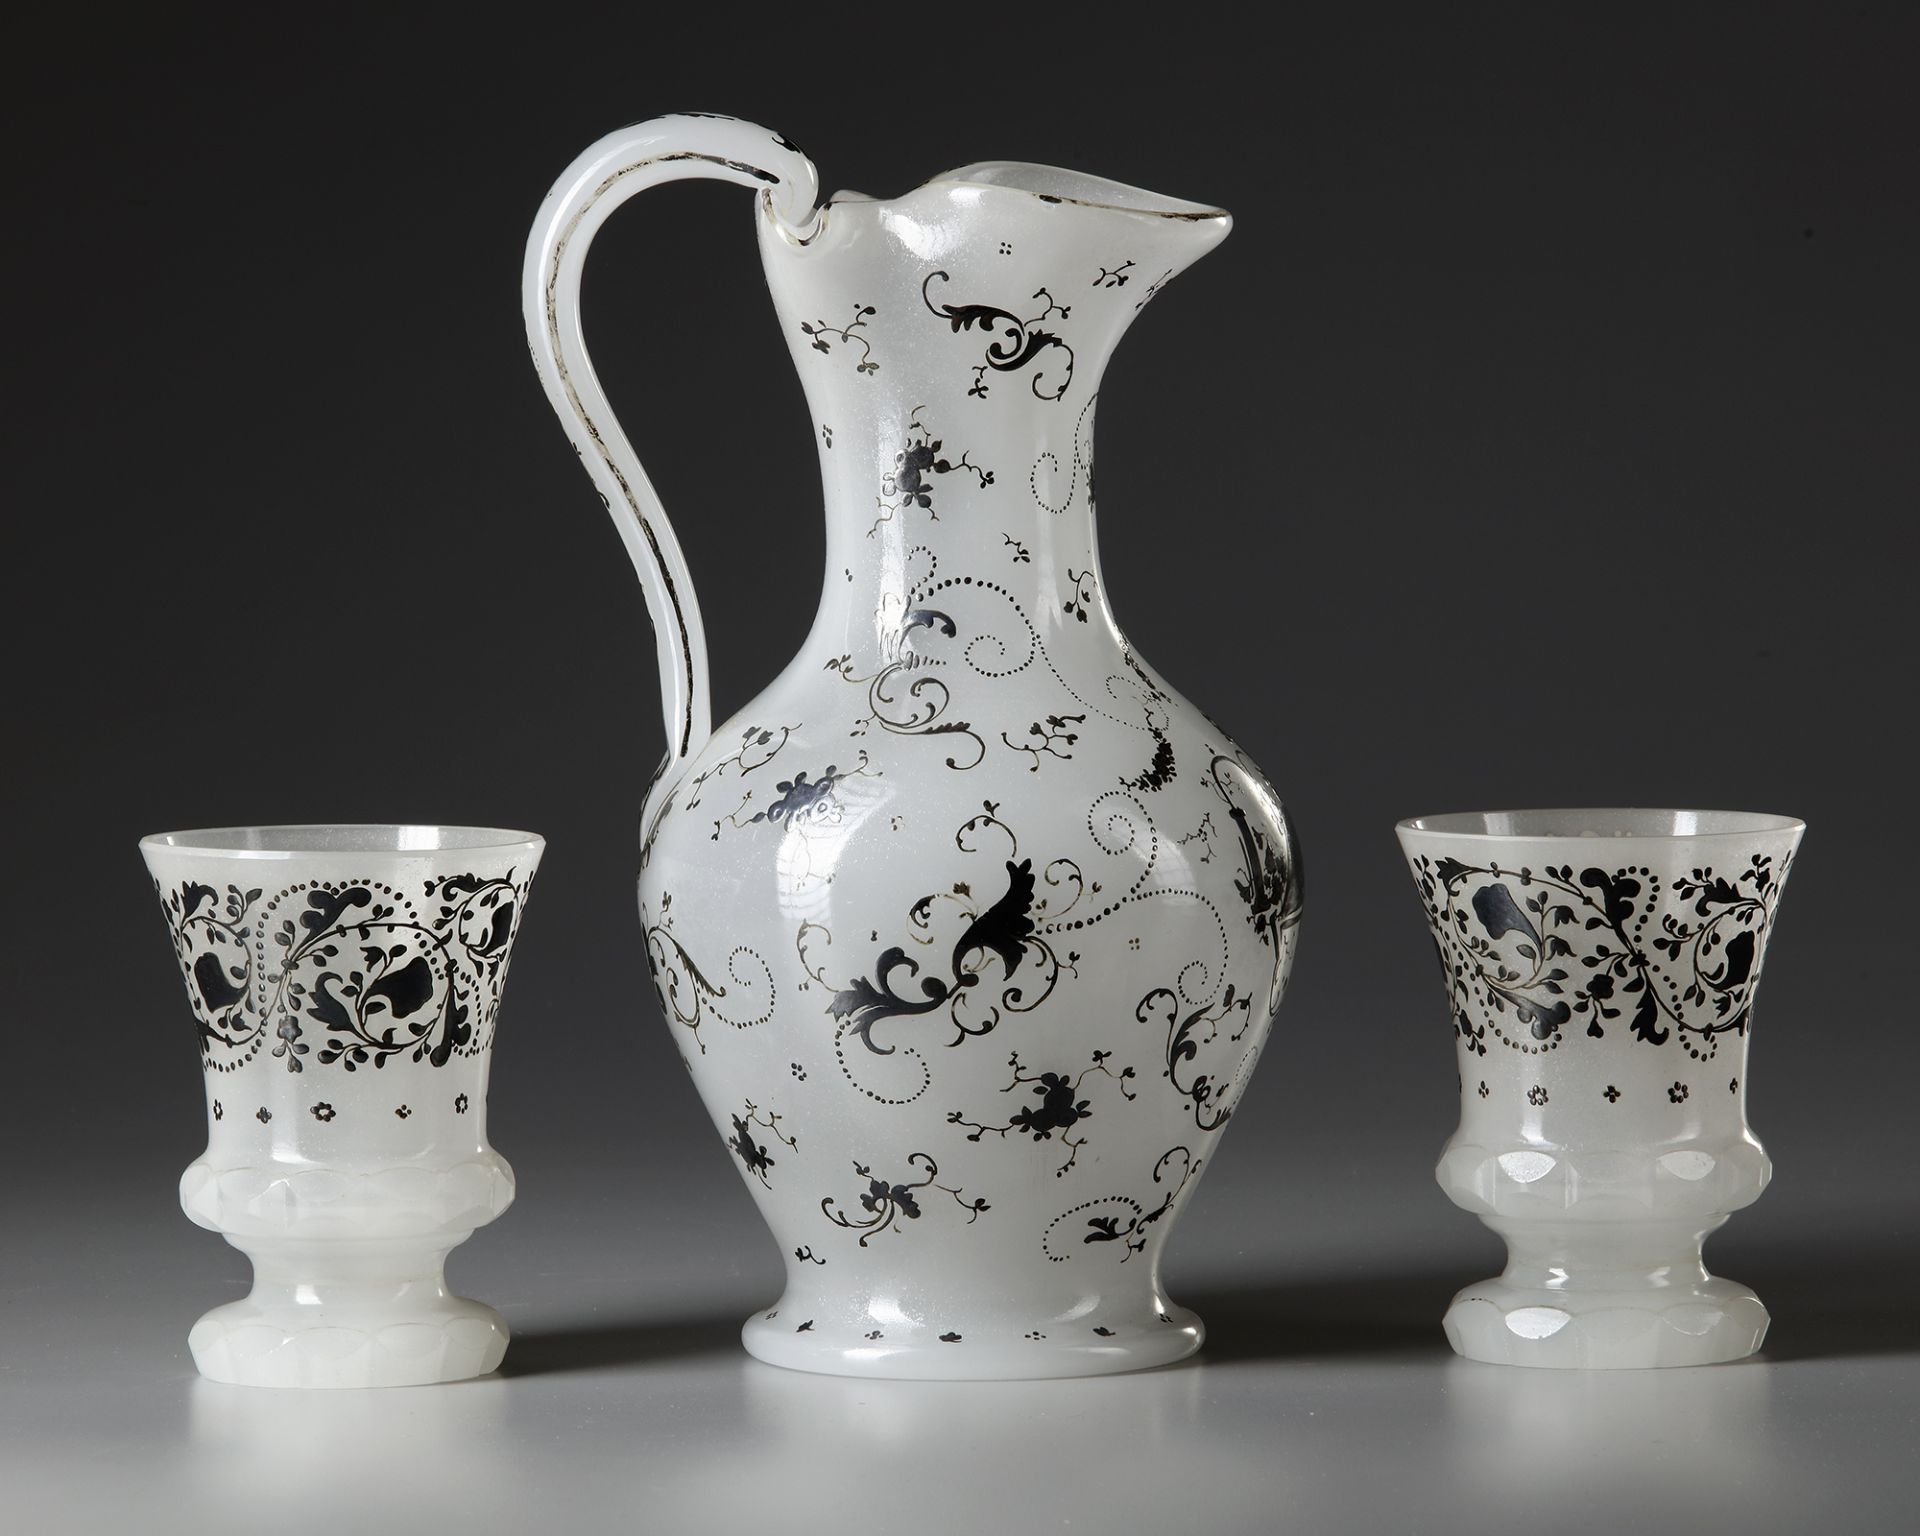 A WHITE OPALINE SET, FRANCE, LATE 19TH CENTURY